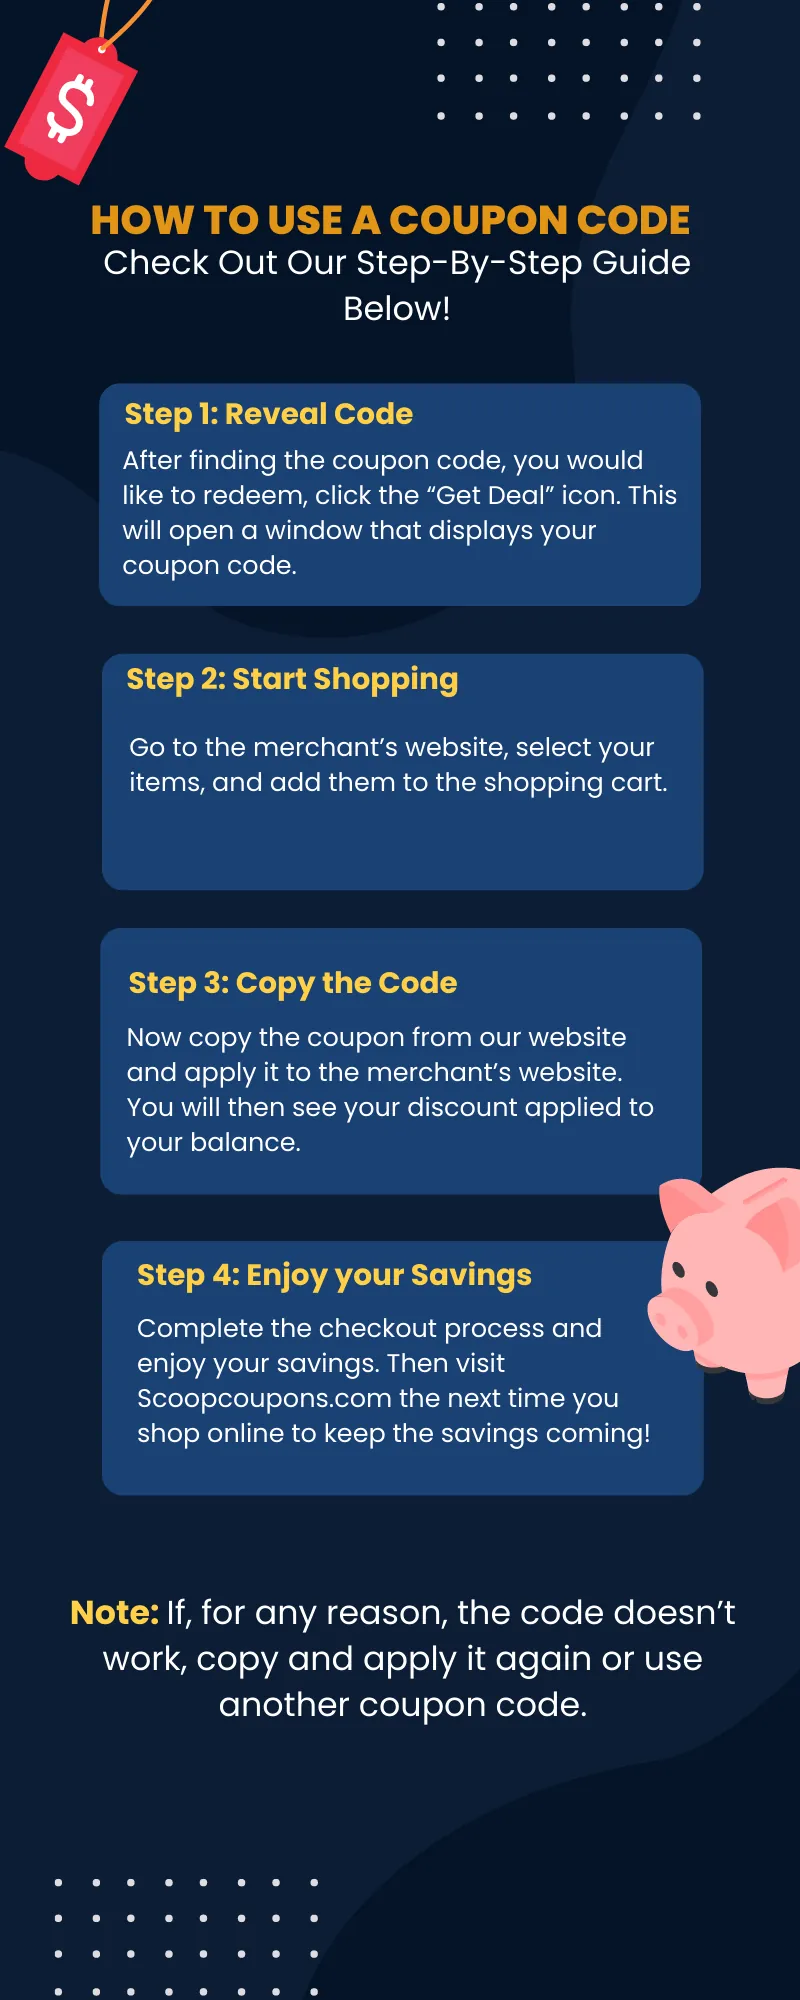 How To Use a Coupon Code